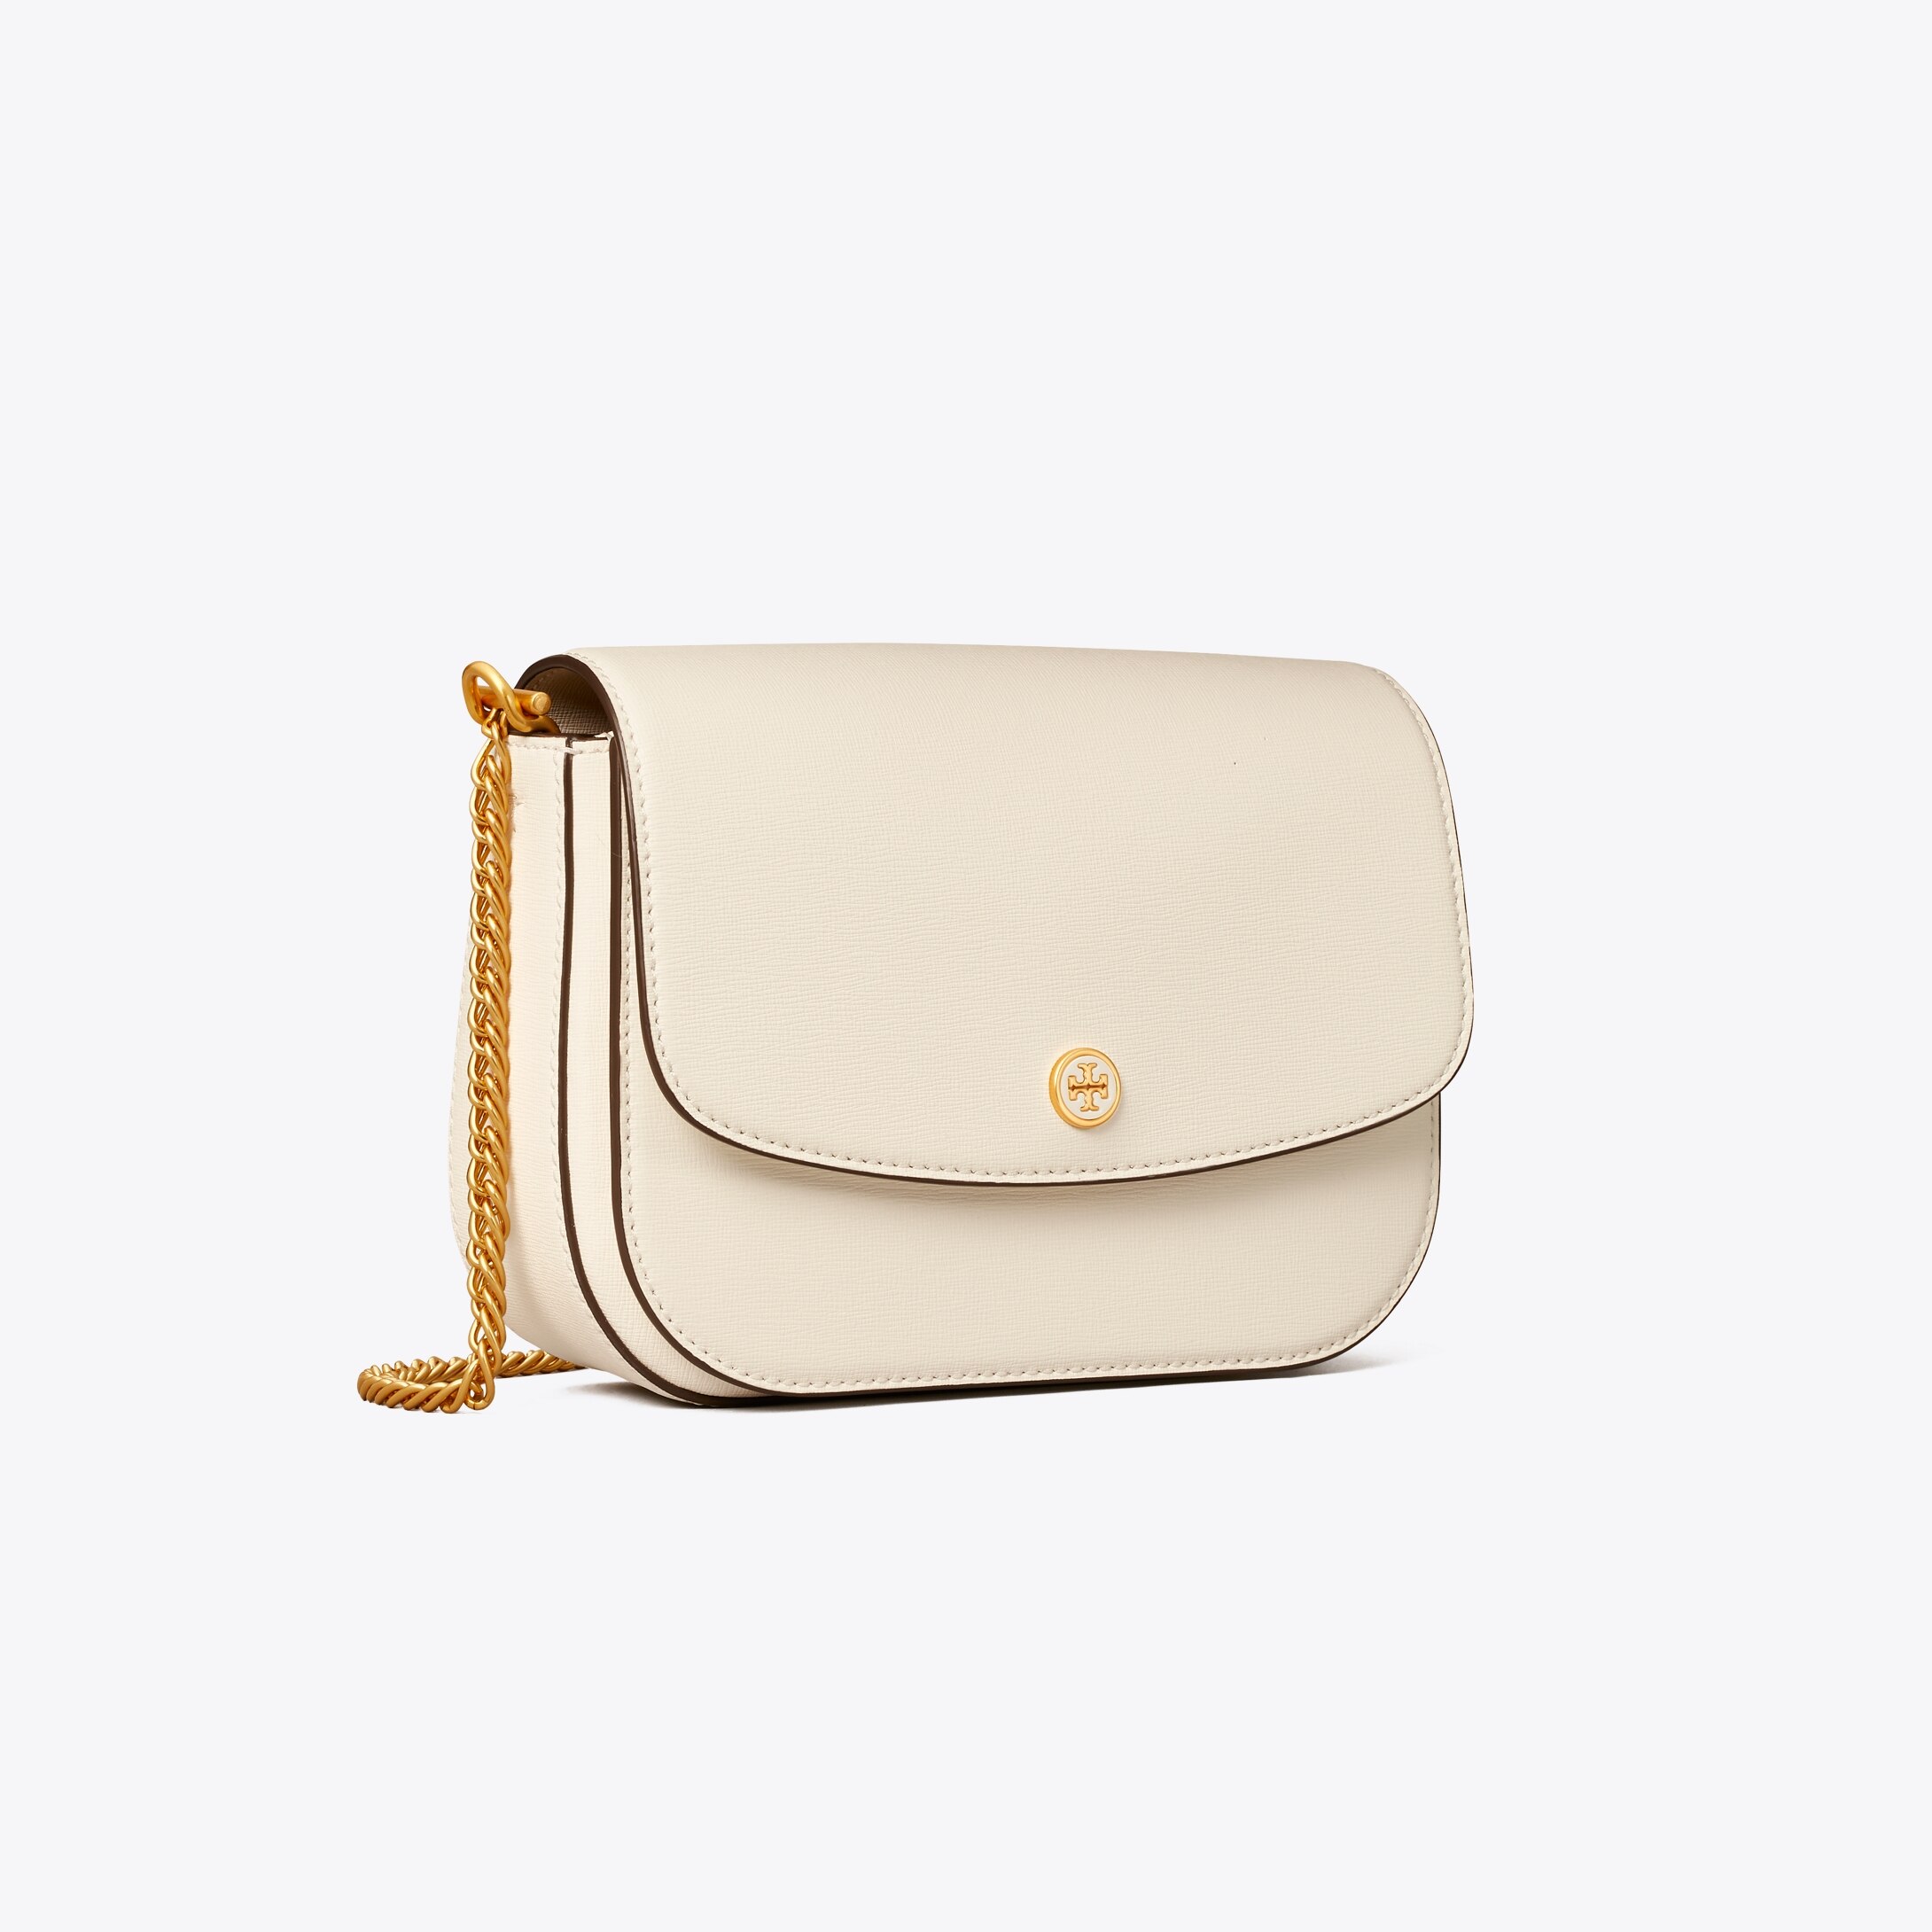 Tory Burch on Instagram: The new Robinson. A compact shoulder bag